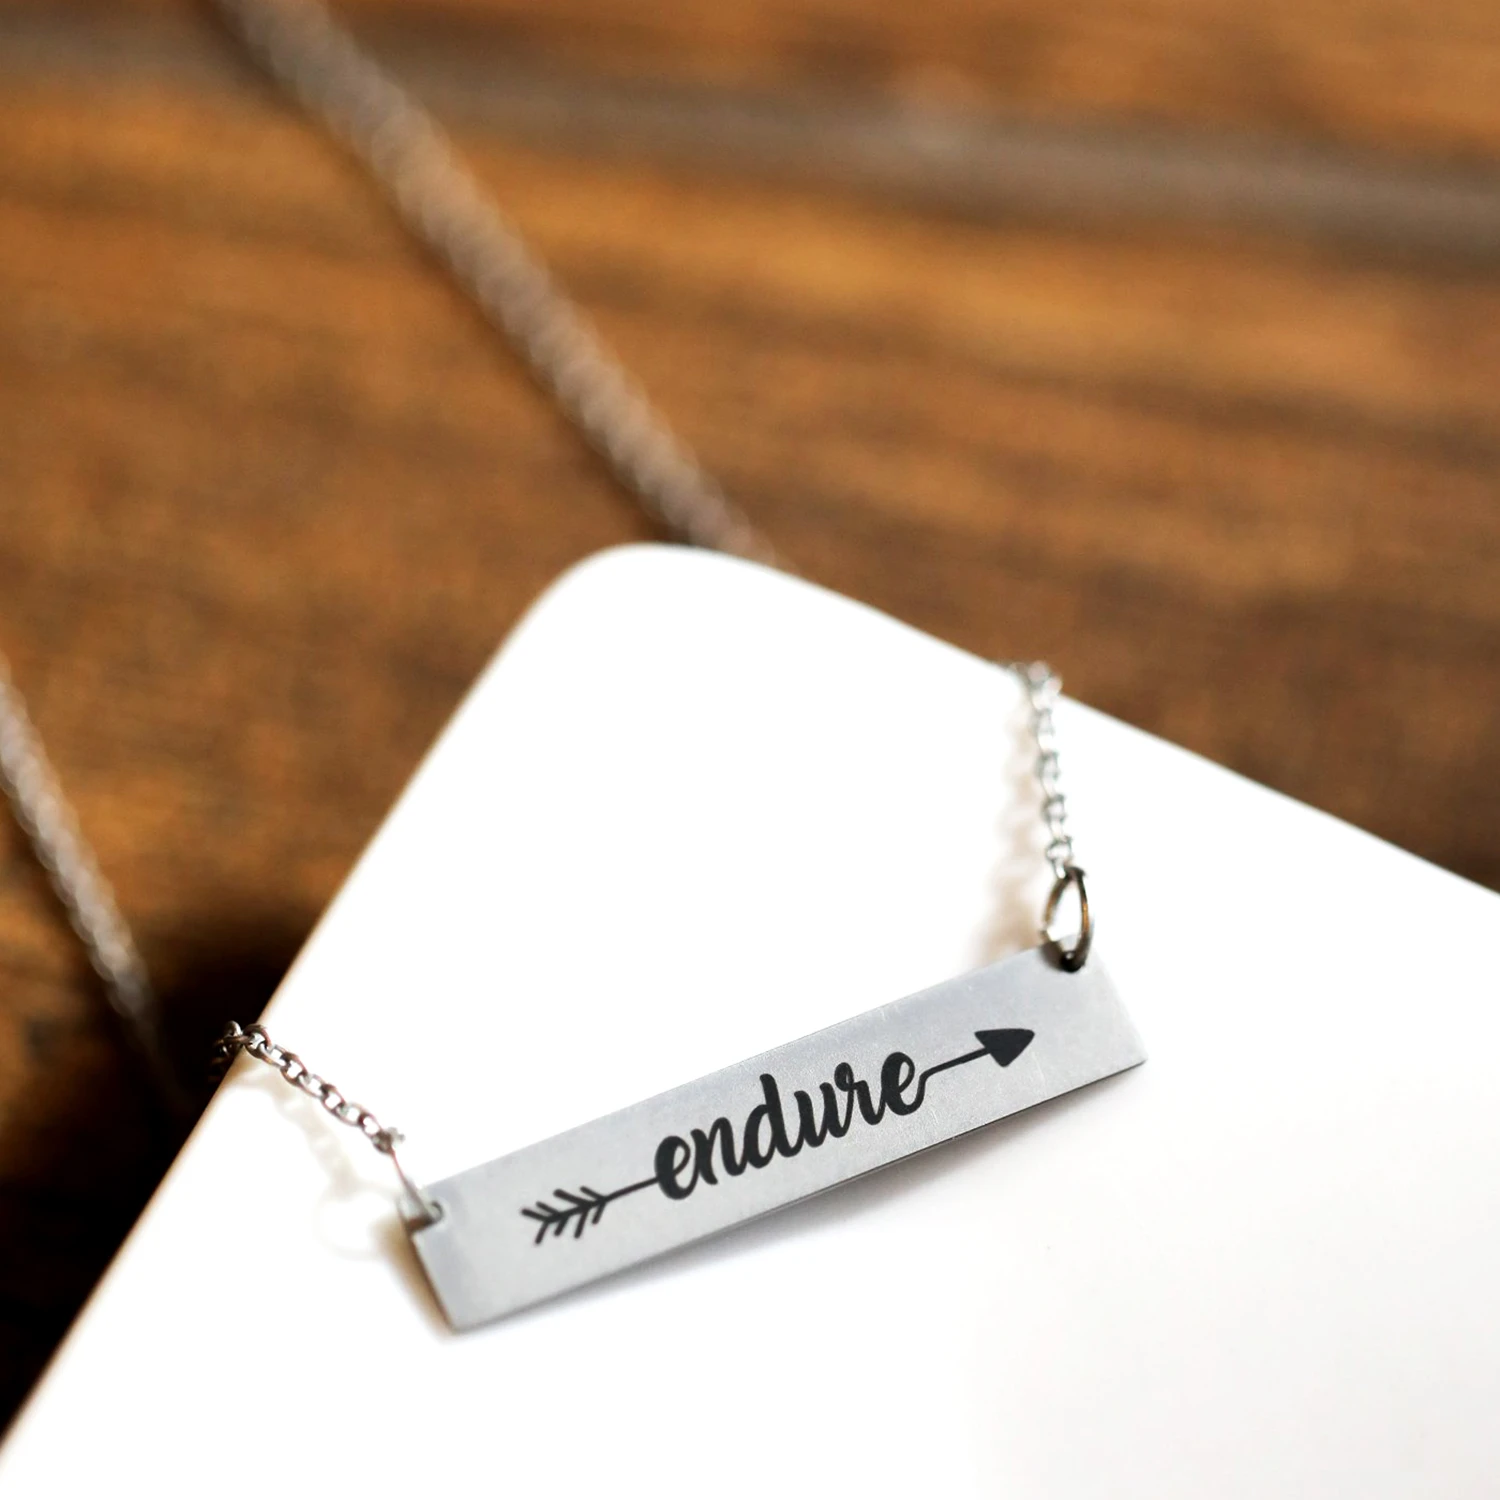 RM - Necklace - Endure To The End - Endure Bar Necklace<BR/>「最後まで耐え忍ぶ」ネックレス